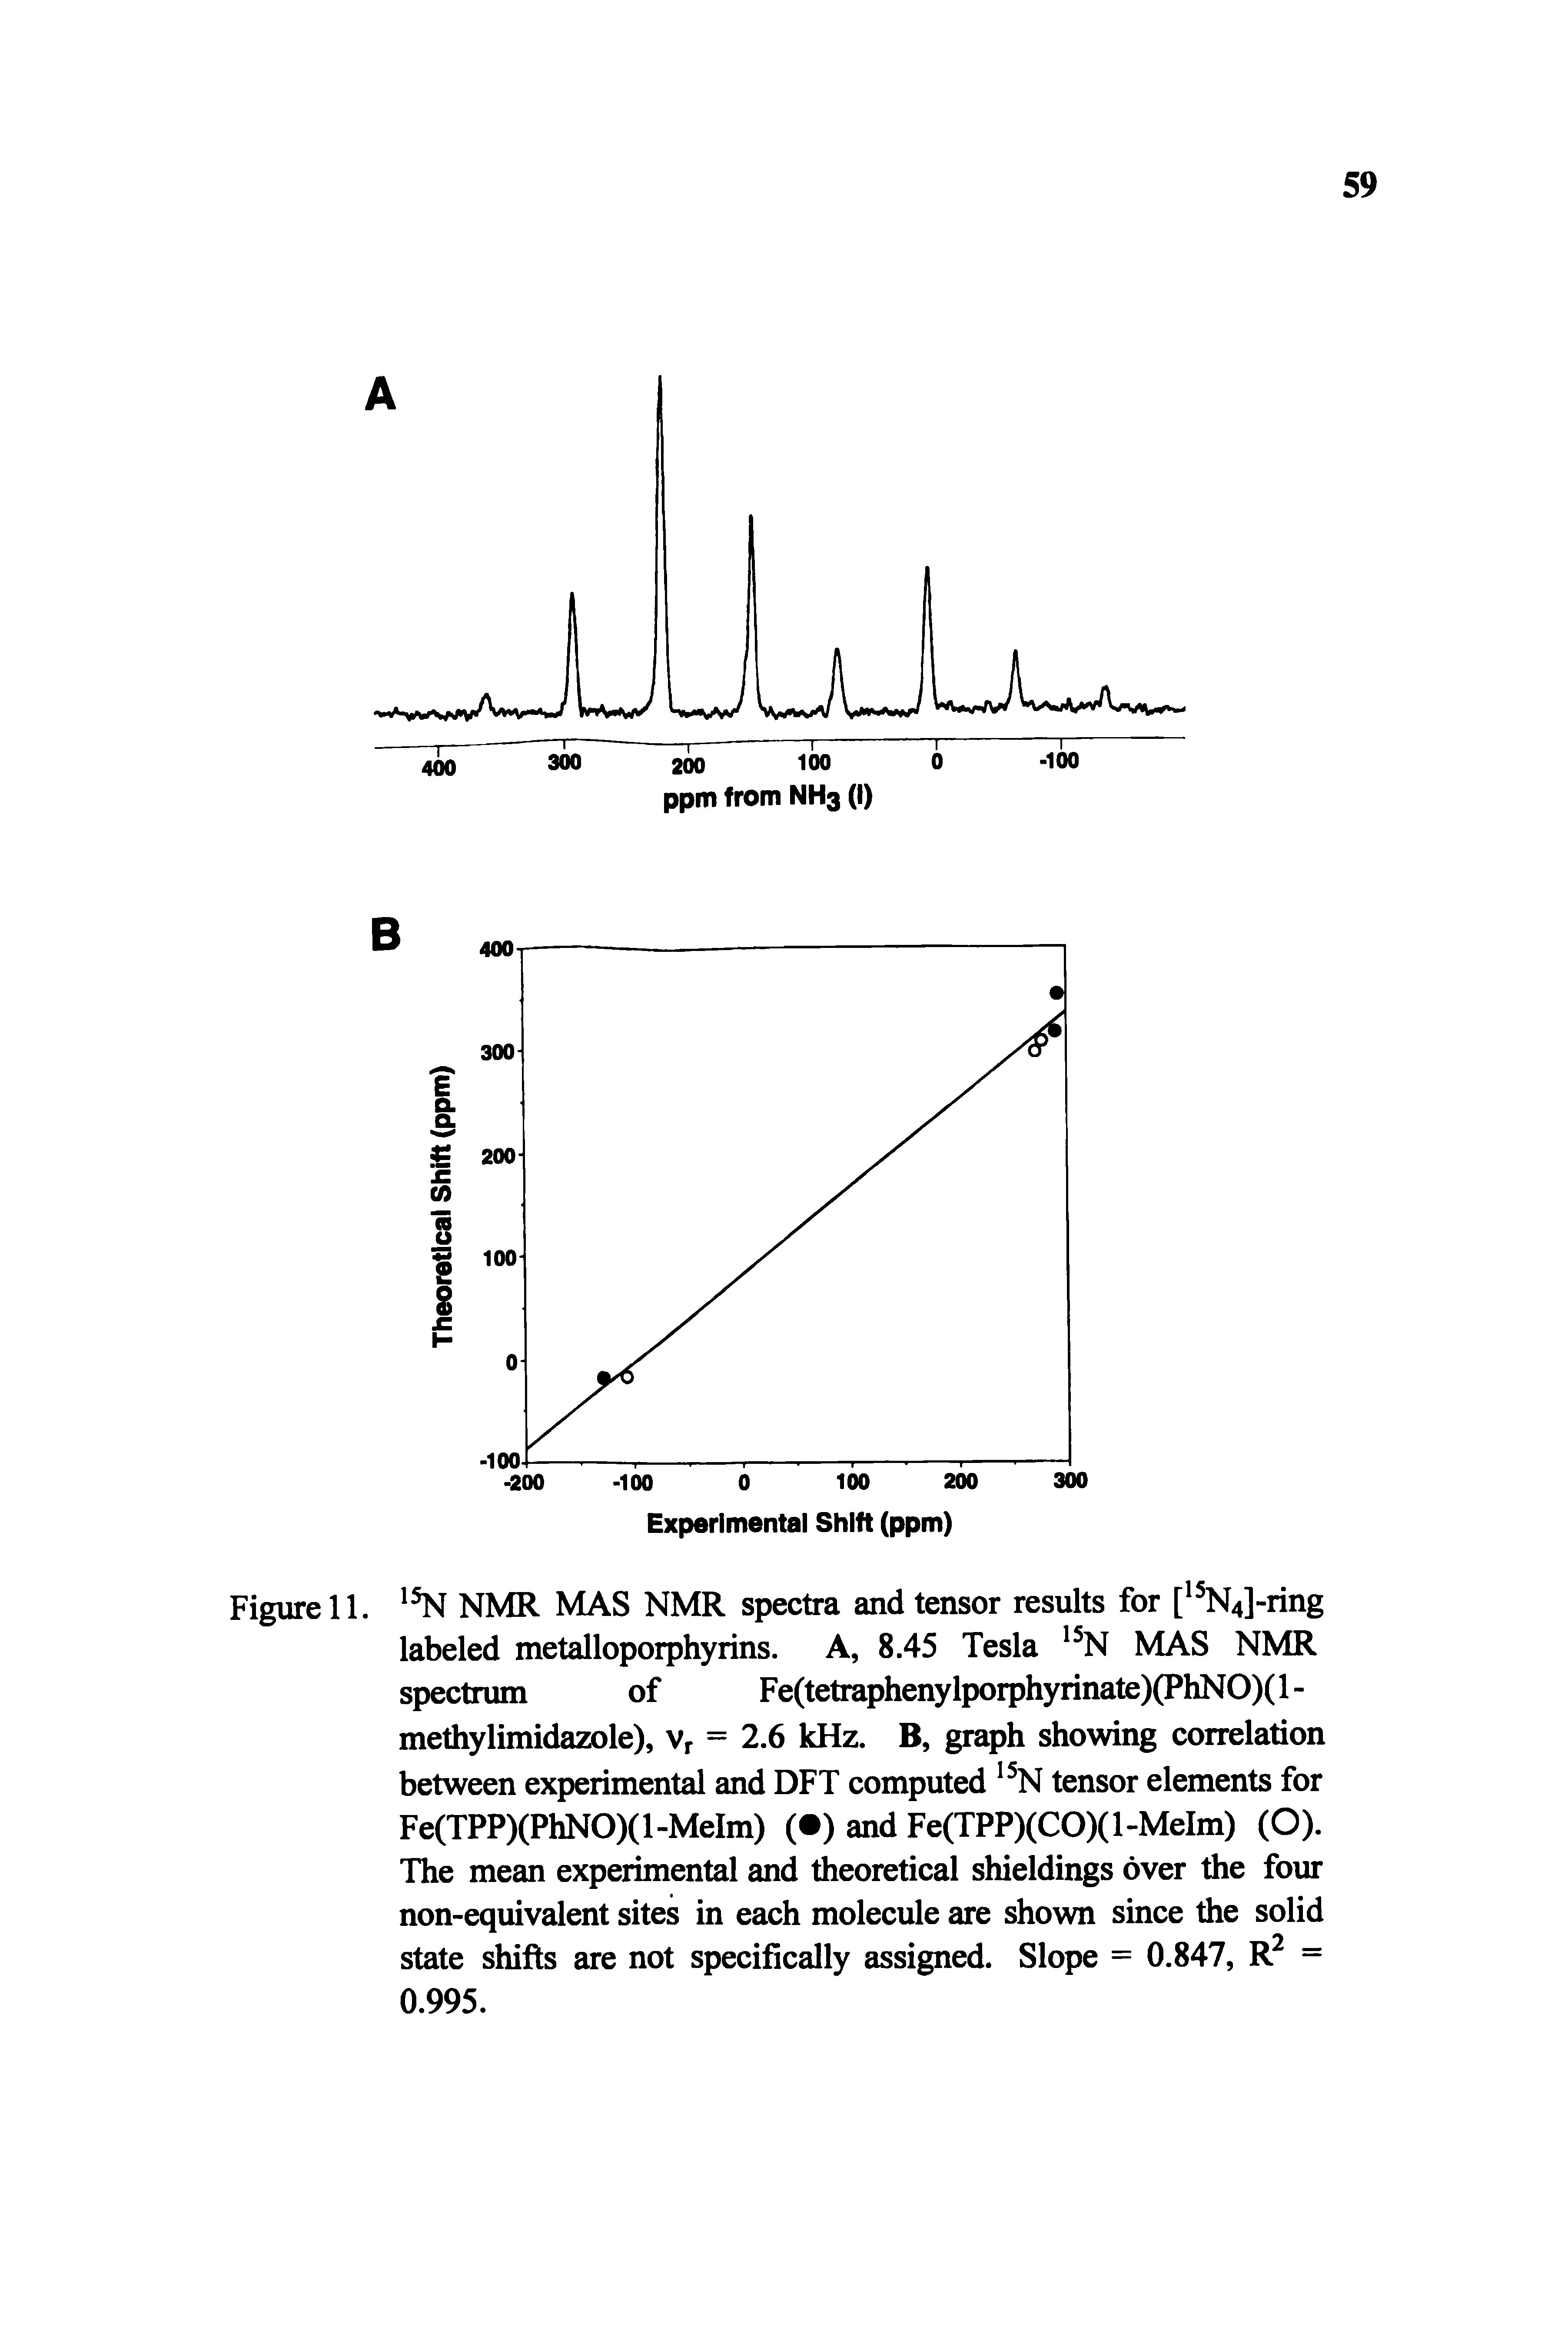 Figure 11. 15N NMR MAS NMR spectra and tensor results for [15N4]-ring labeled metalloporphyrins. A, 8.45 Tesla 15N MAS NMR spectrum of Fe(tetraphenylporphyrinate)(PhNO)( 1 -methylimidazole), vr = 2.6 kHz. B, graph showing correlation between experimental and DFT computed I5N tensor elements for Fe(TPP)(PhNO)( 1 -Melm) ( ) and Fe(TPP)(CO)(l-MeIm) (O). The mean experimental and theoretical shieldings over the four non-equivalent sites in each molecule are shown since the solid state shifts are not specifically assigned. Slope = 0.847, R2 = 0.995.